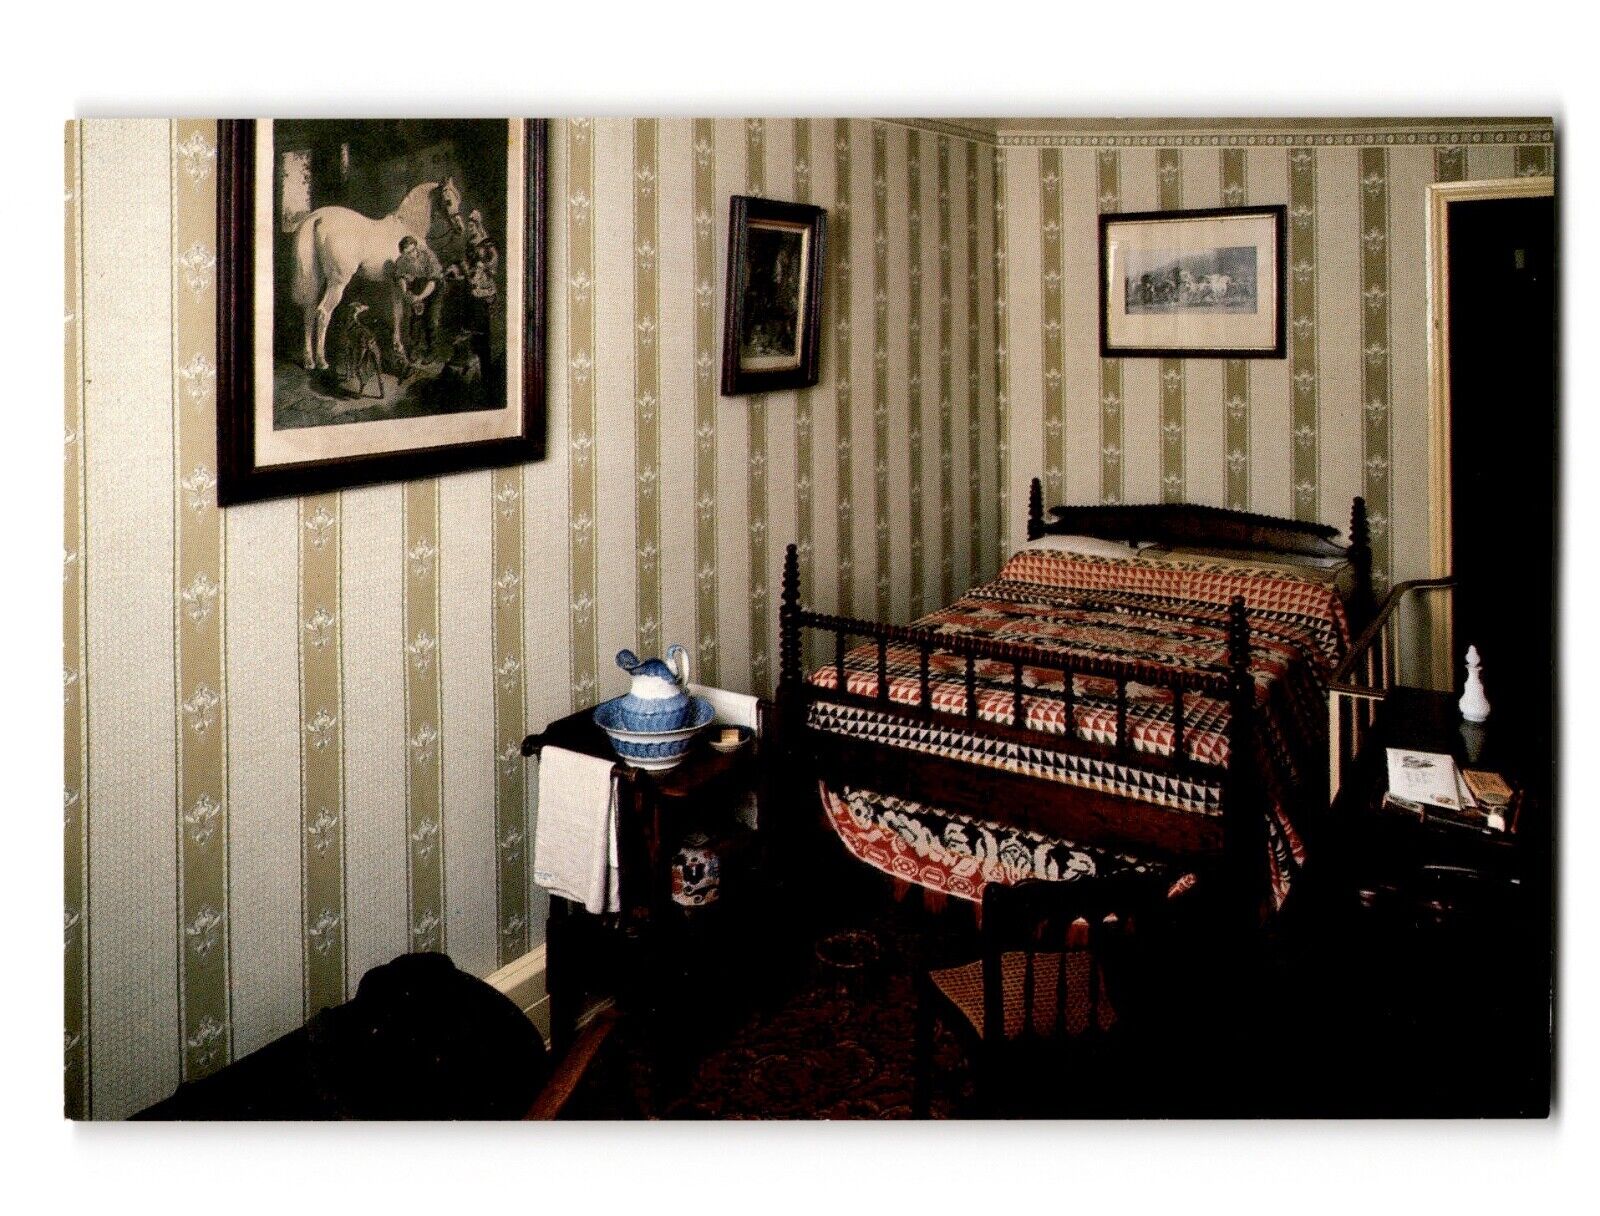 Petersen House Lincoln Death Room Ford's Theatre Postcard